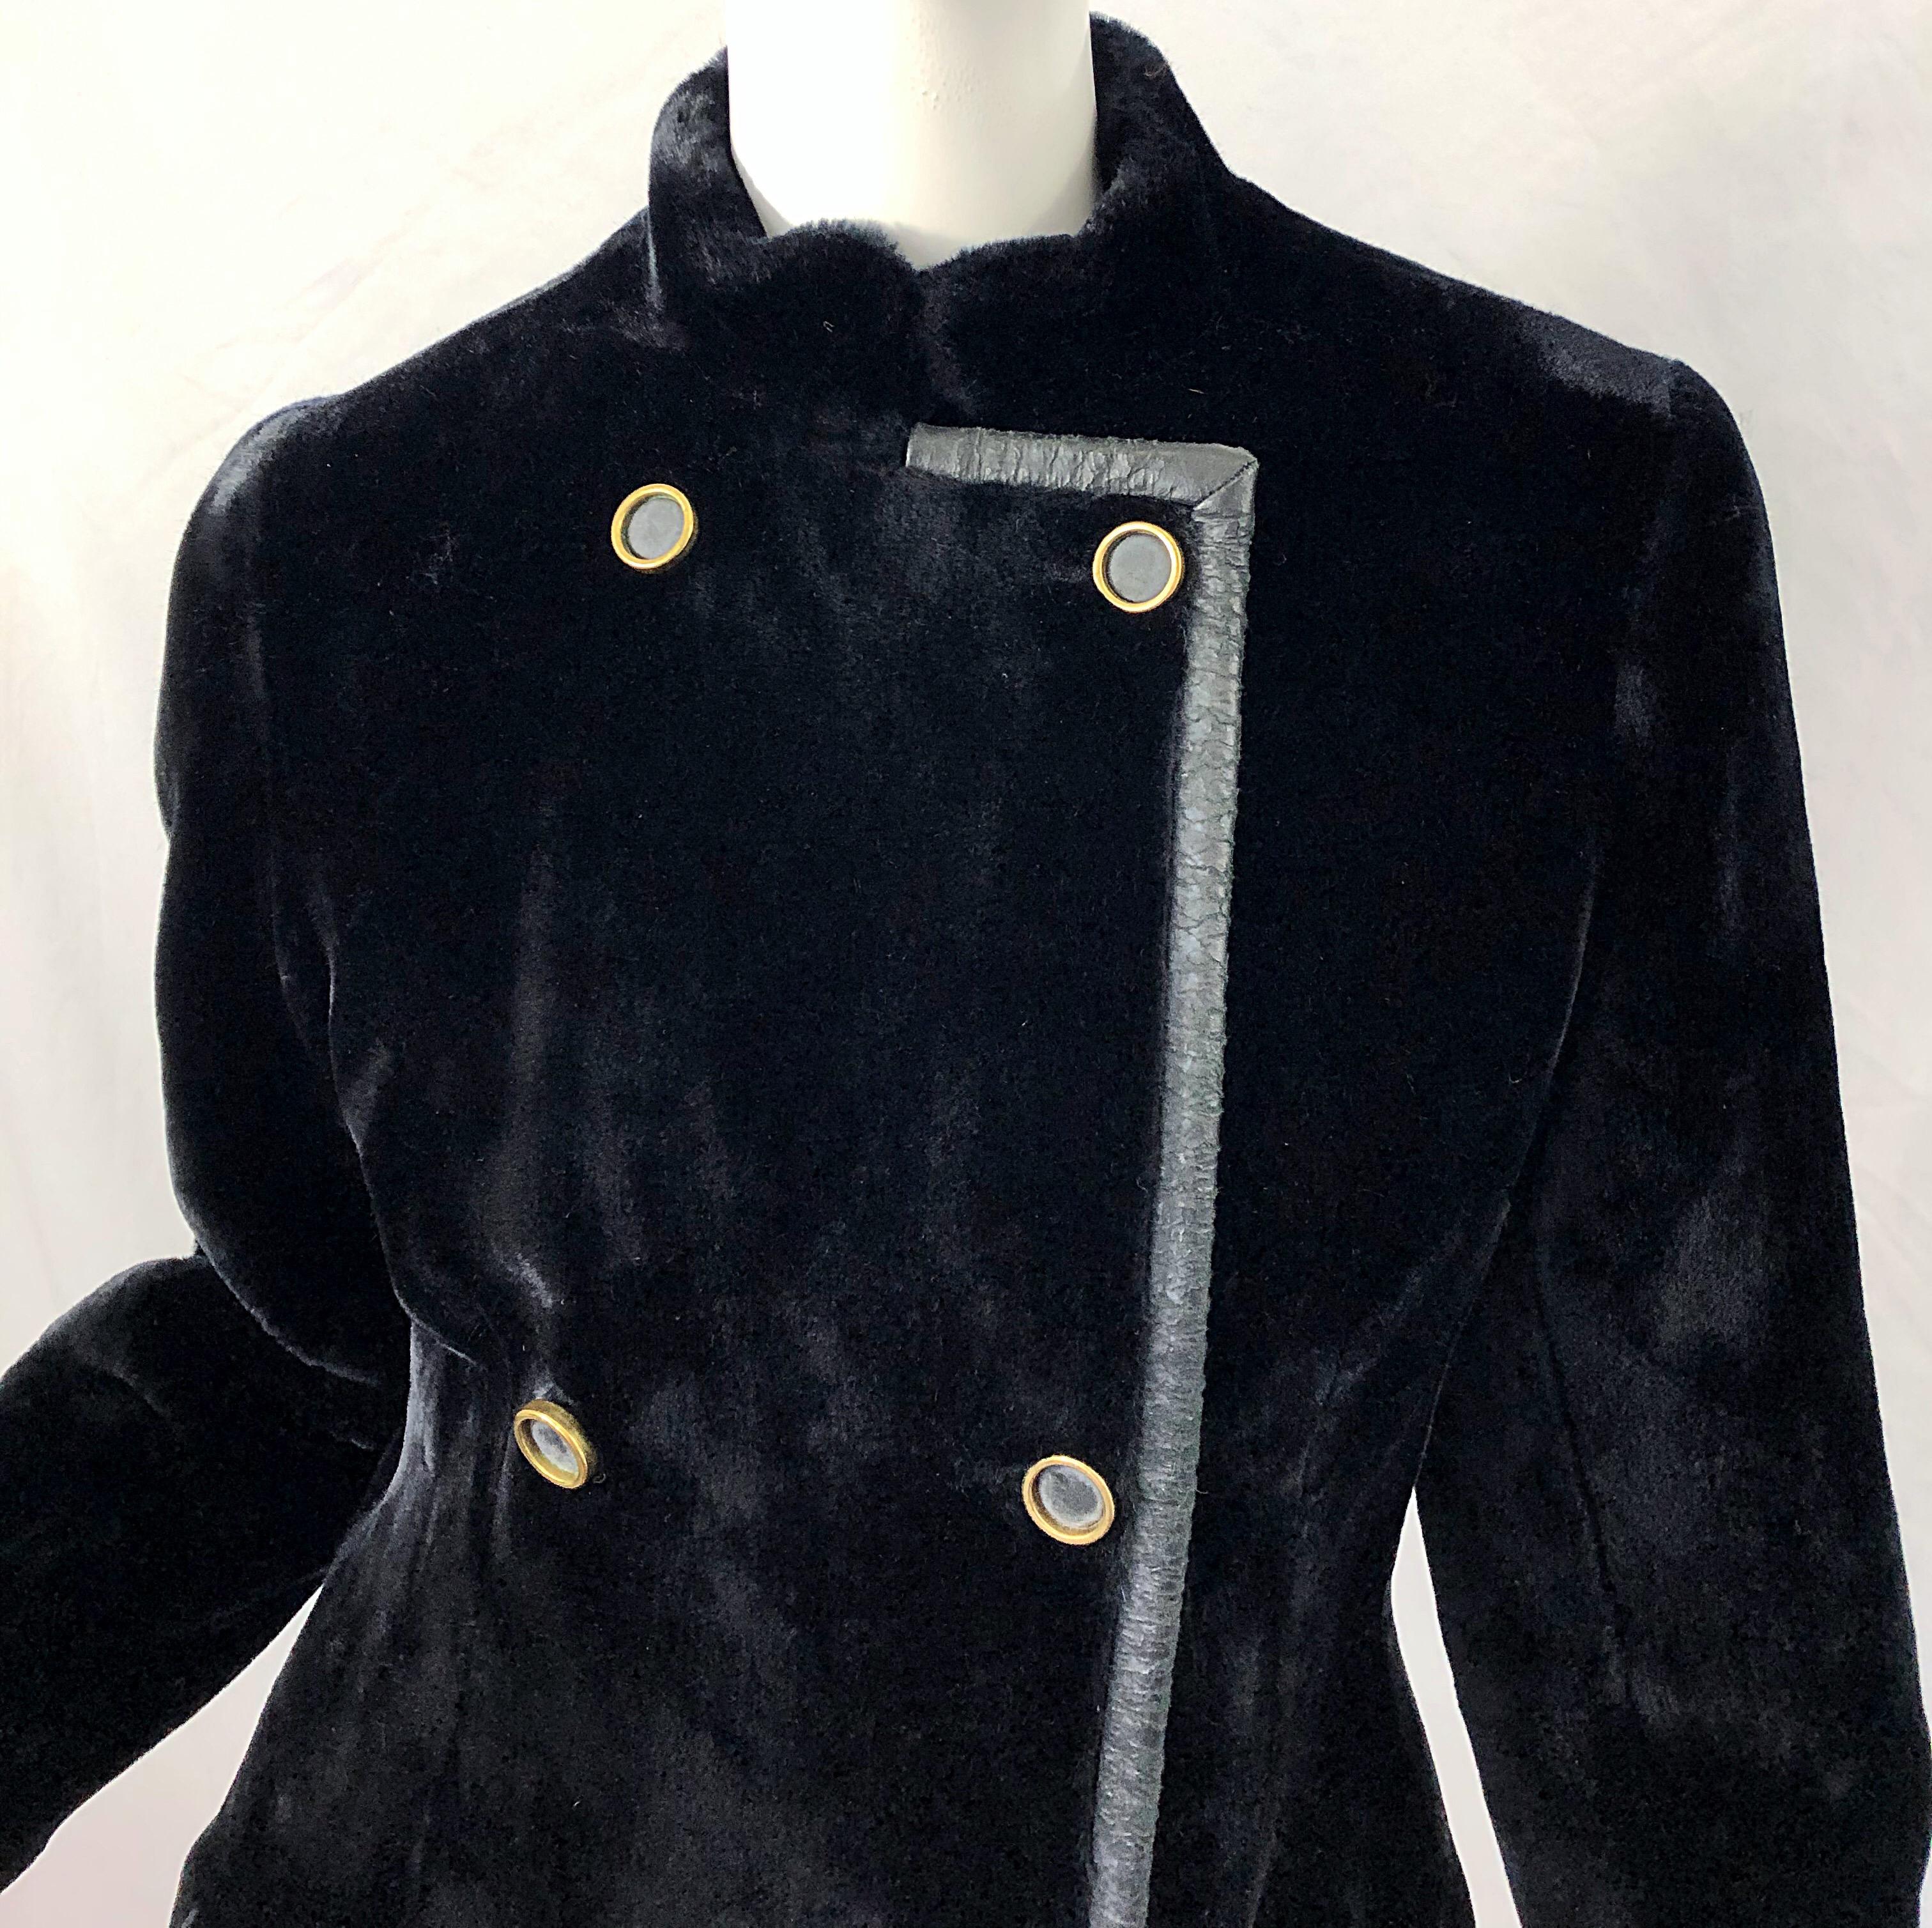 Women's Givenchy 1960s Faux Fur Black Double Breasted Vintage 60s Swing Jacket Coat